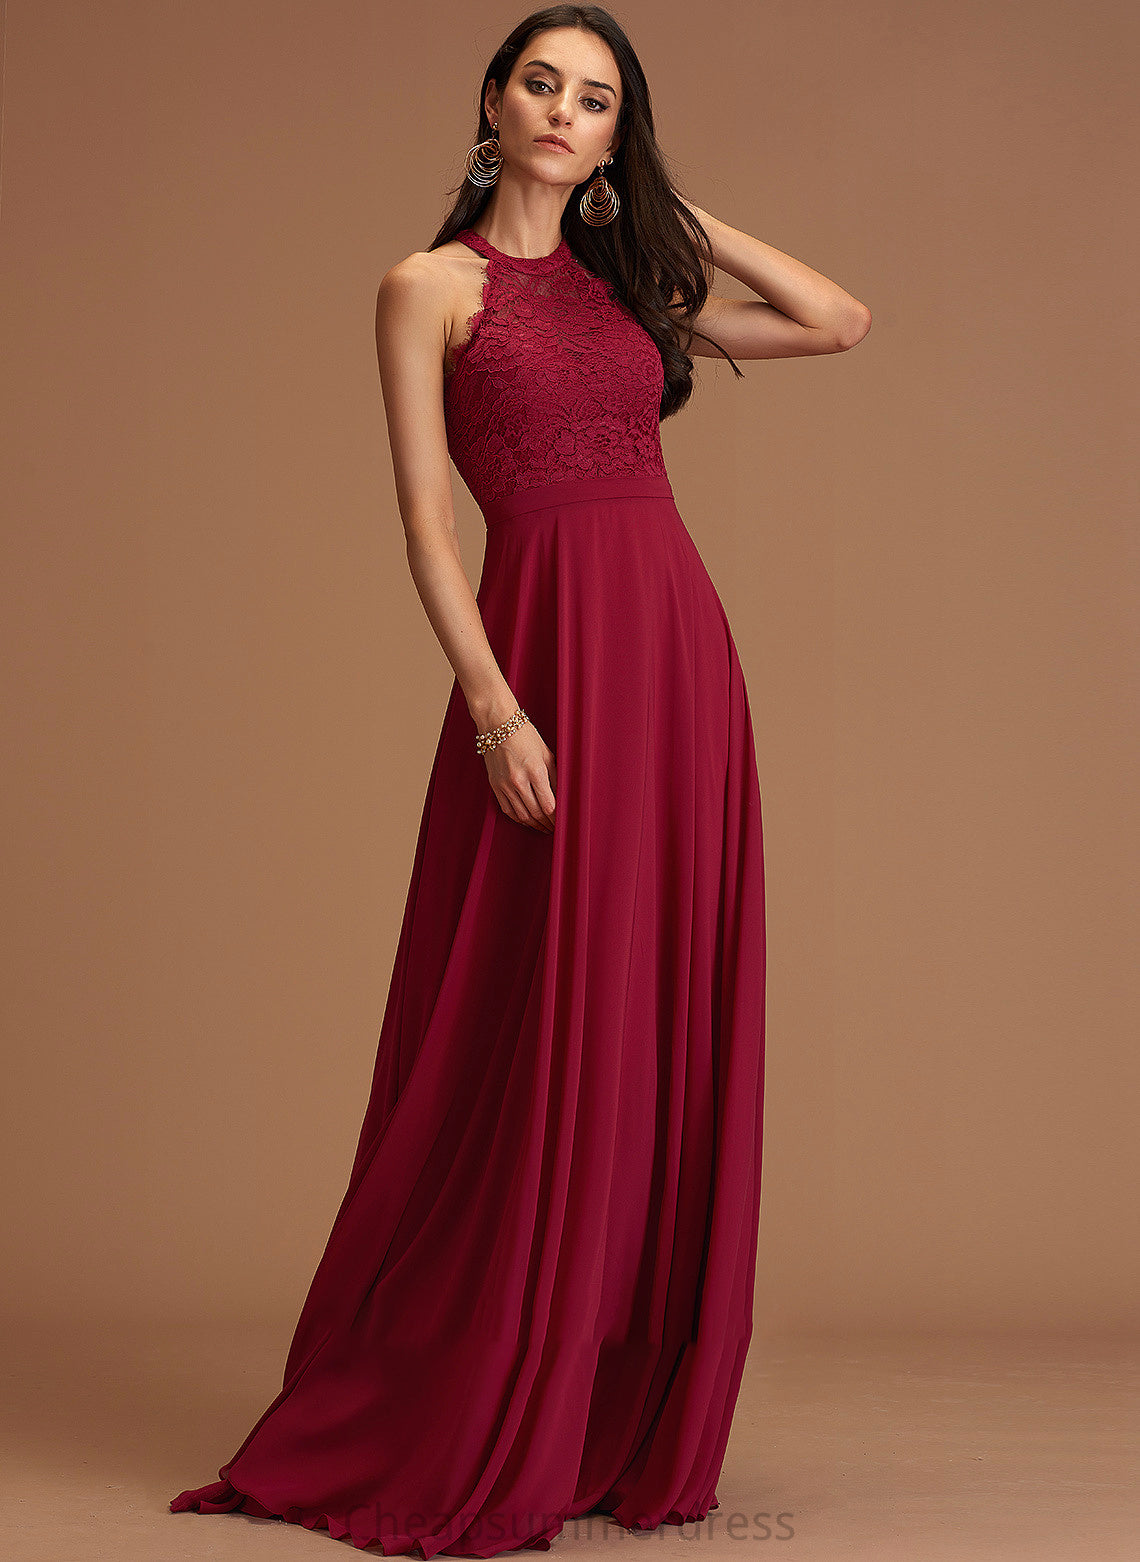 Lace Alayna With Prom Dresses Chiffon Neck A-Line Scoop Floor-Length